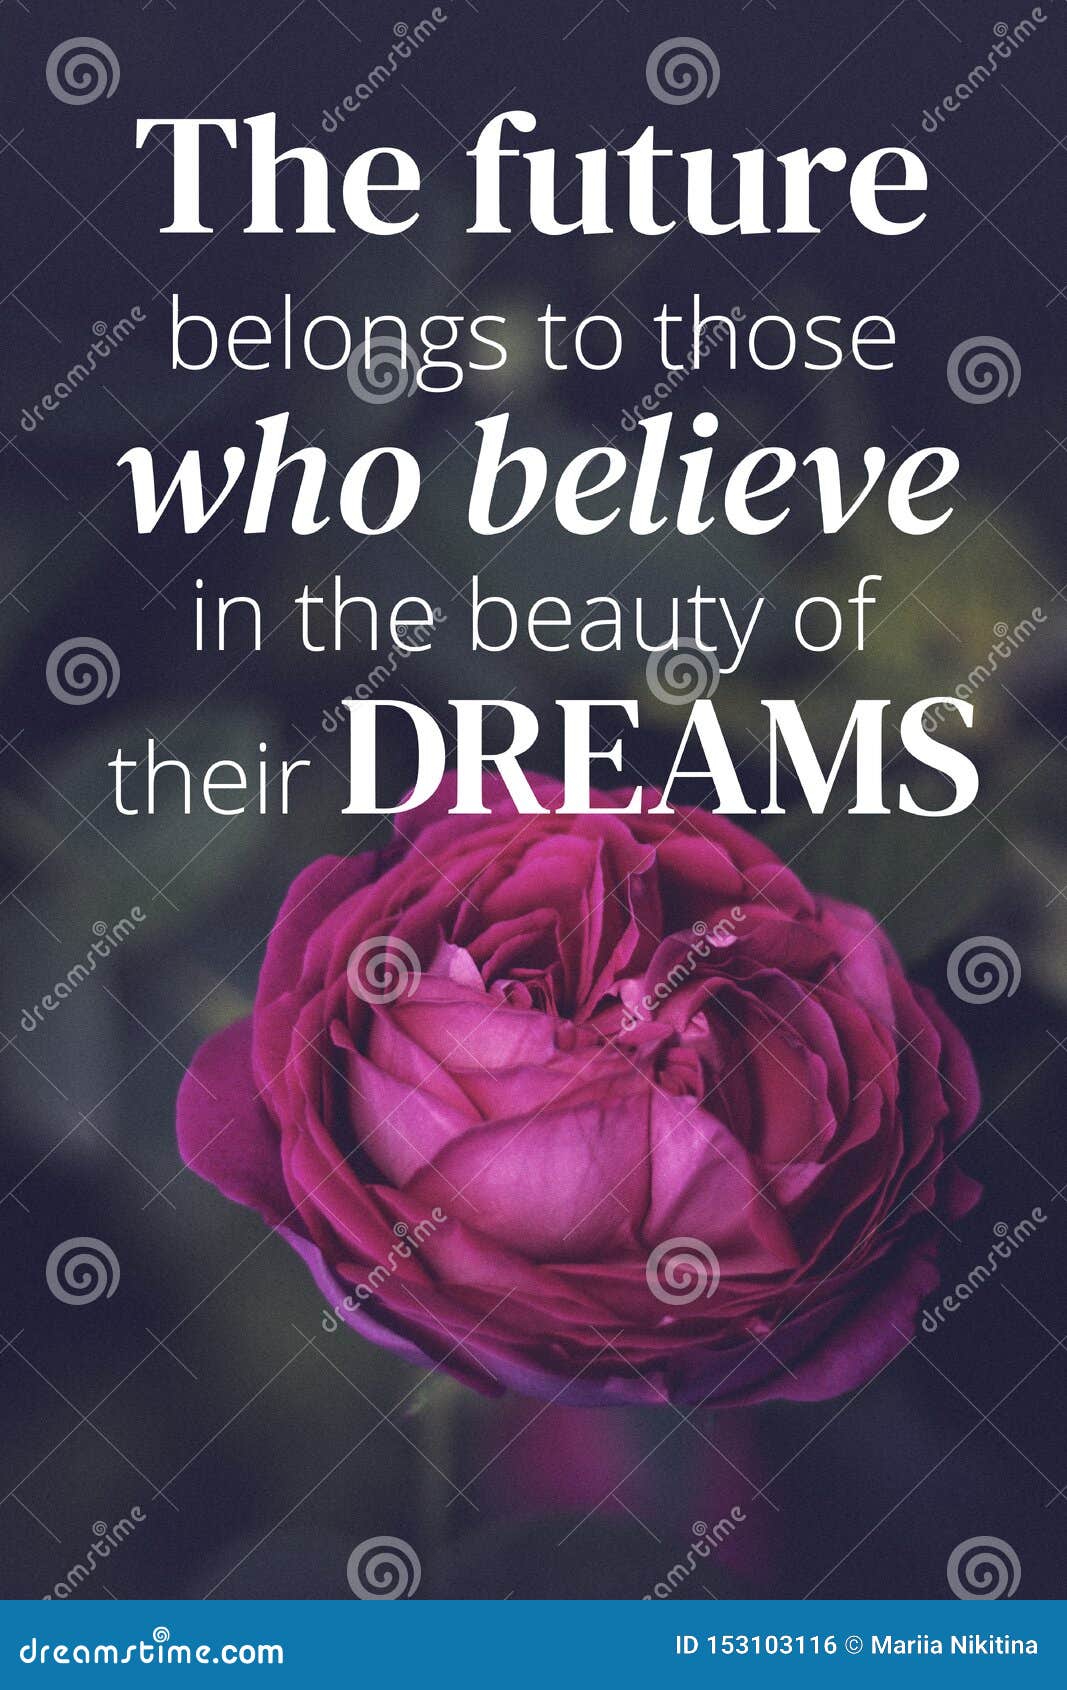 inspirational quotes. the future belongs to those who believe in the beaty of their dreams